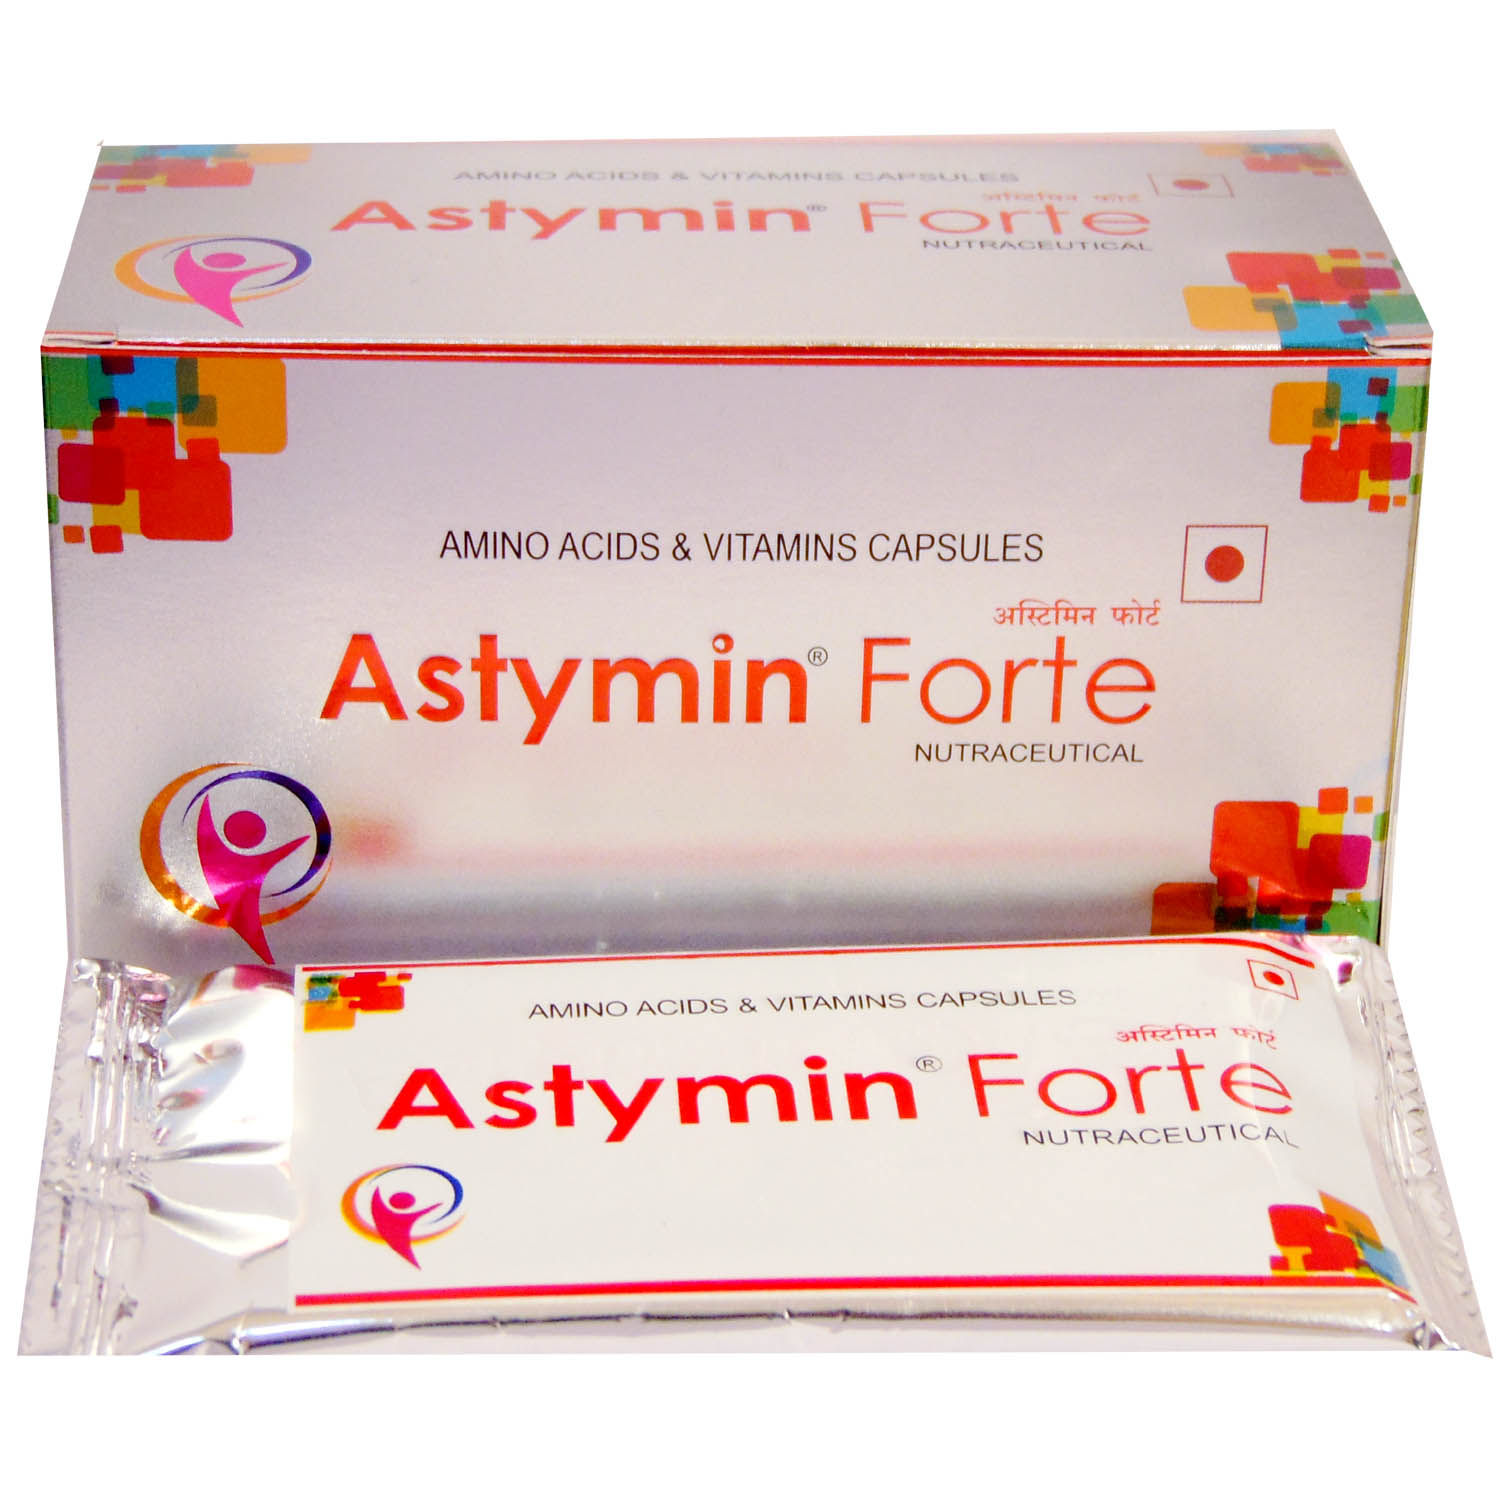 Astymin Forte Capsule 10's Price, Uses, Side Effects, Composition ...